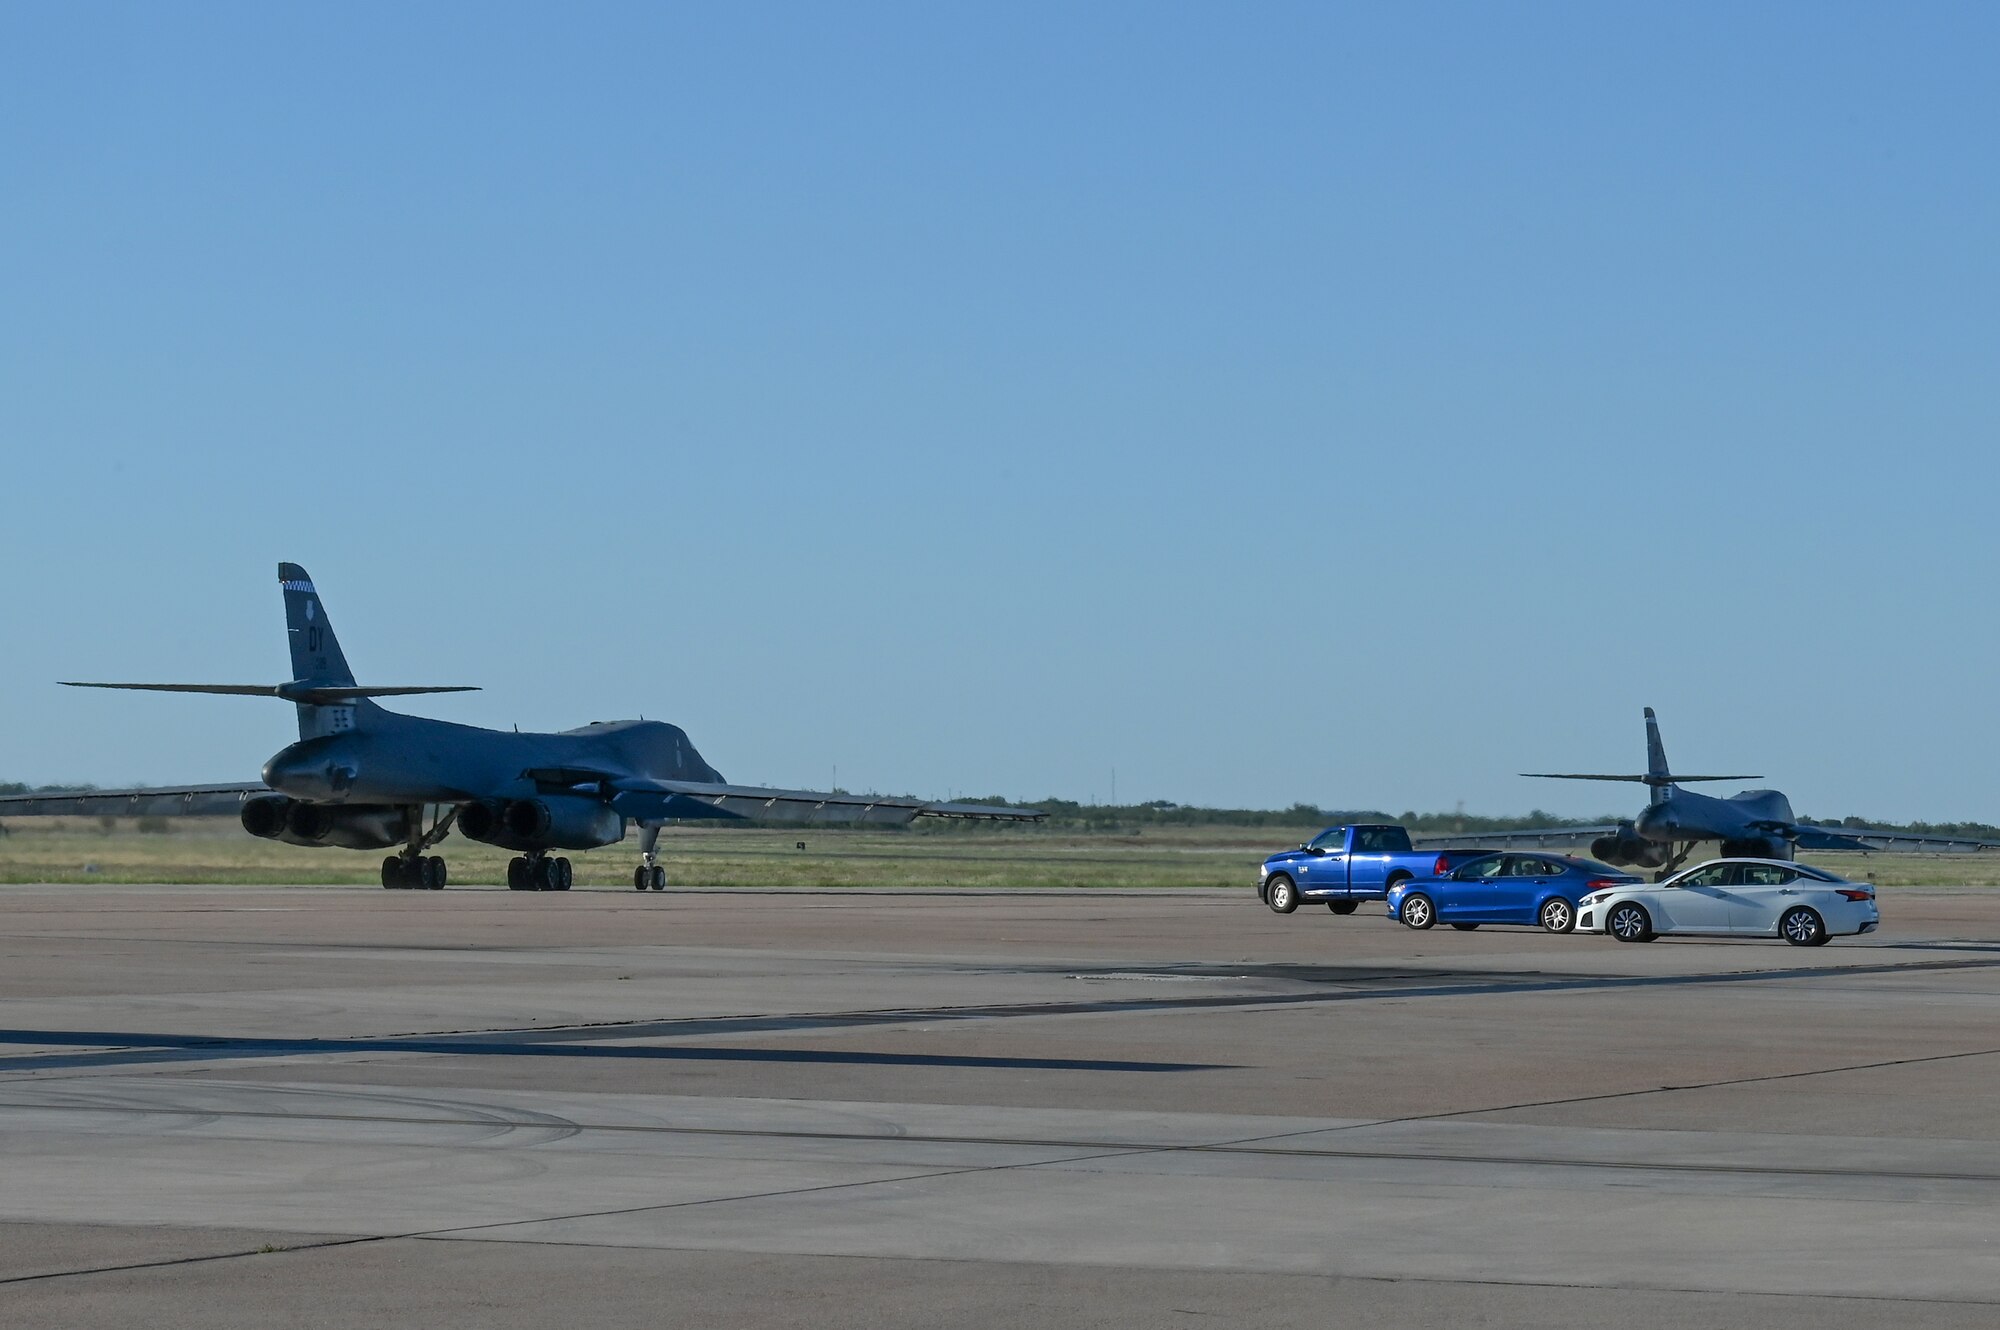 Two B-1B Lancers taxi on the flightline at Dyess Air Force Base, Texas, Oct. 11, 2023, to kick off a U.S. European Command Bomber Task Force deployment. The bombers will participate in joint and combined training, exercises, and operations, which help mitigate and reduce security risks associated with increased human activity in the Arctic. (U.S. Air Force photo by Senior Airman Sophia Robello)